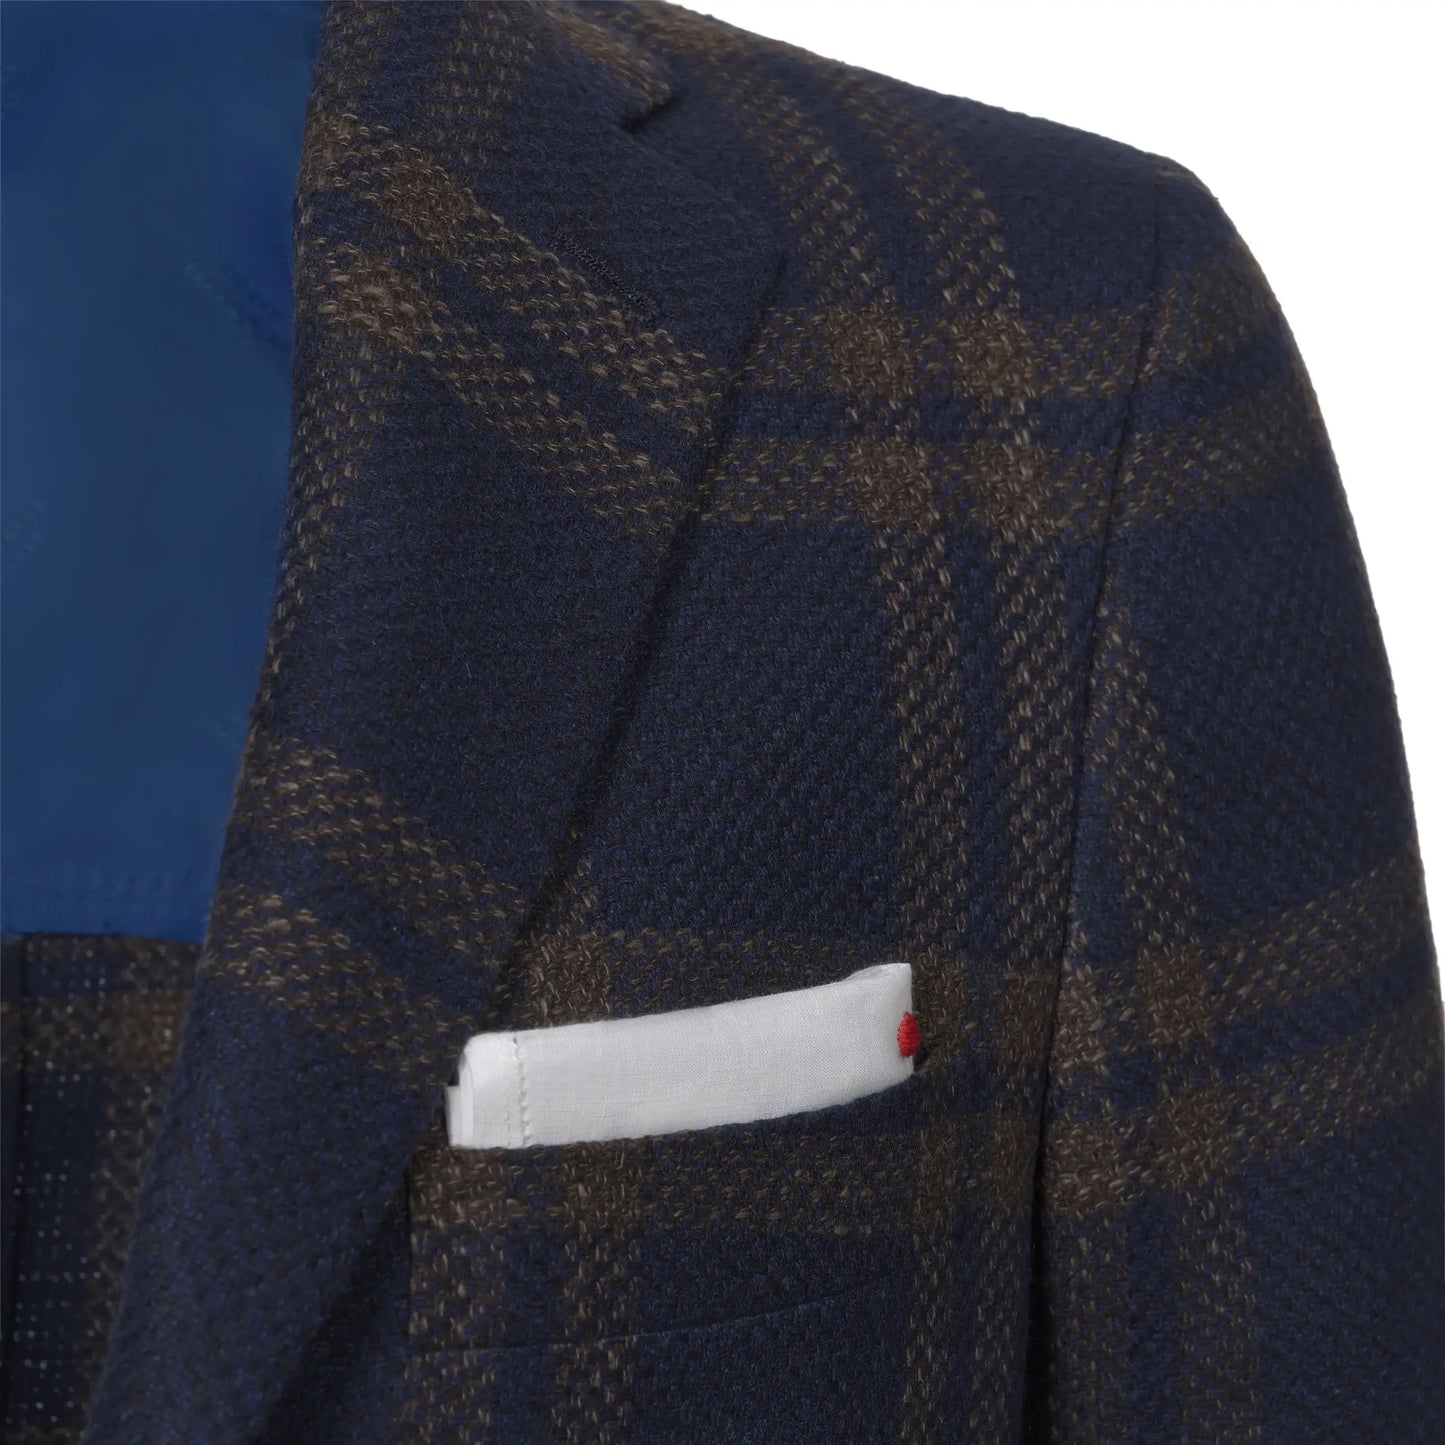 Glencheck Cashmere-Blend Jacket in Royal Blue and Brown